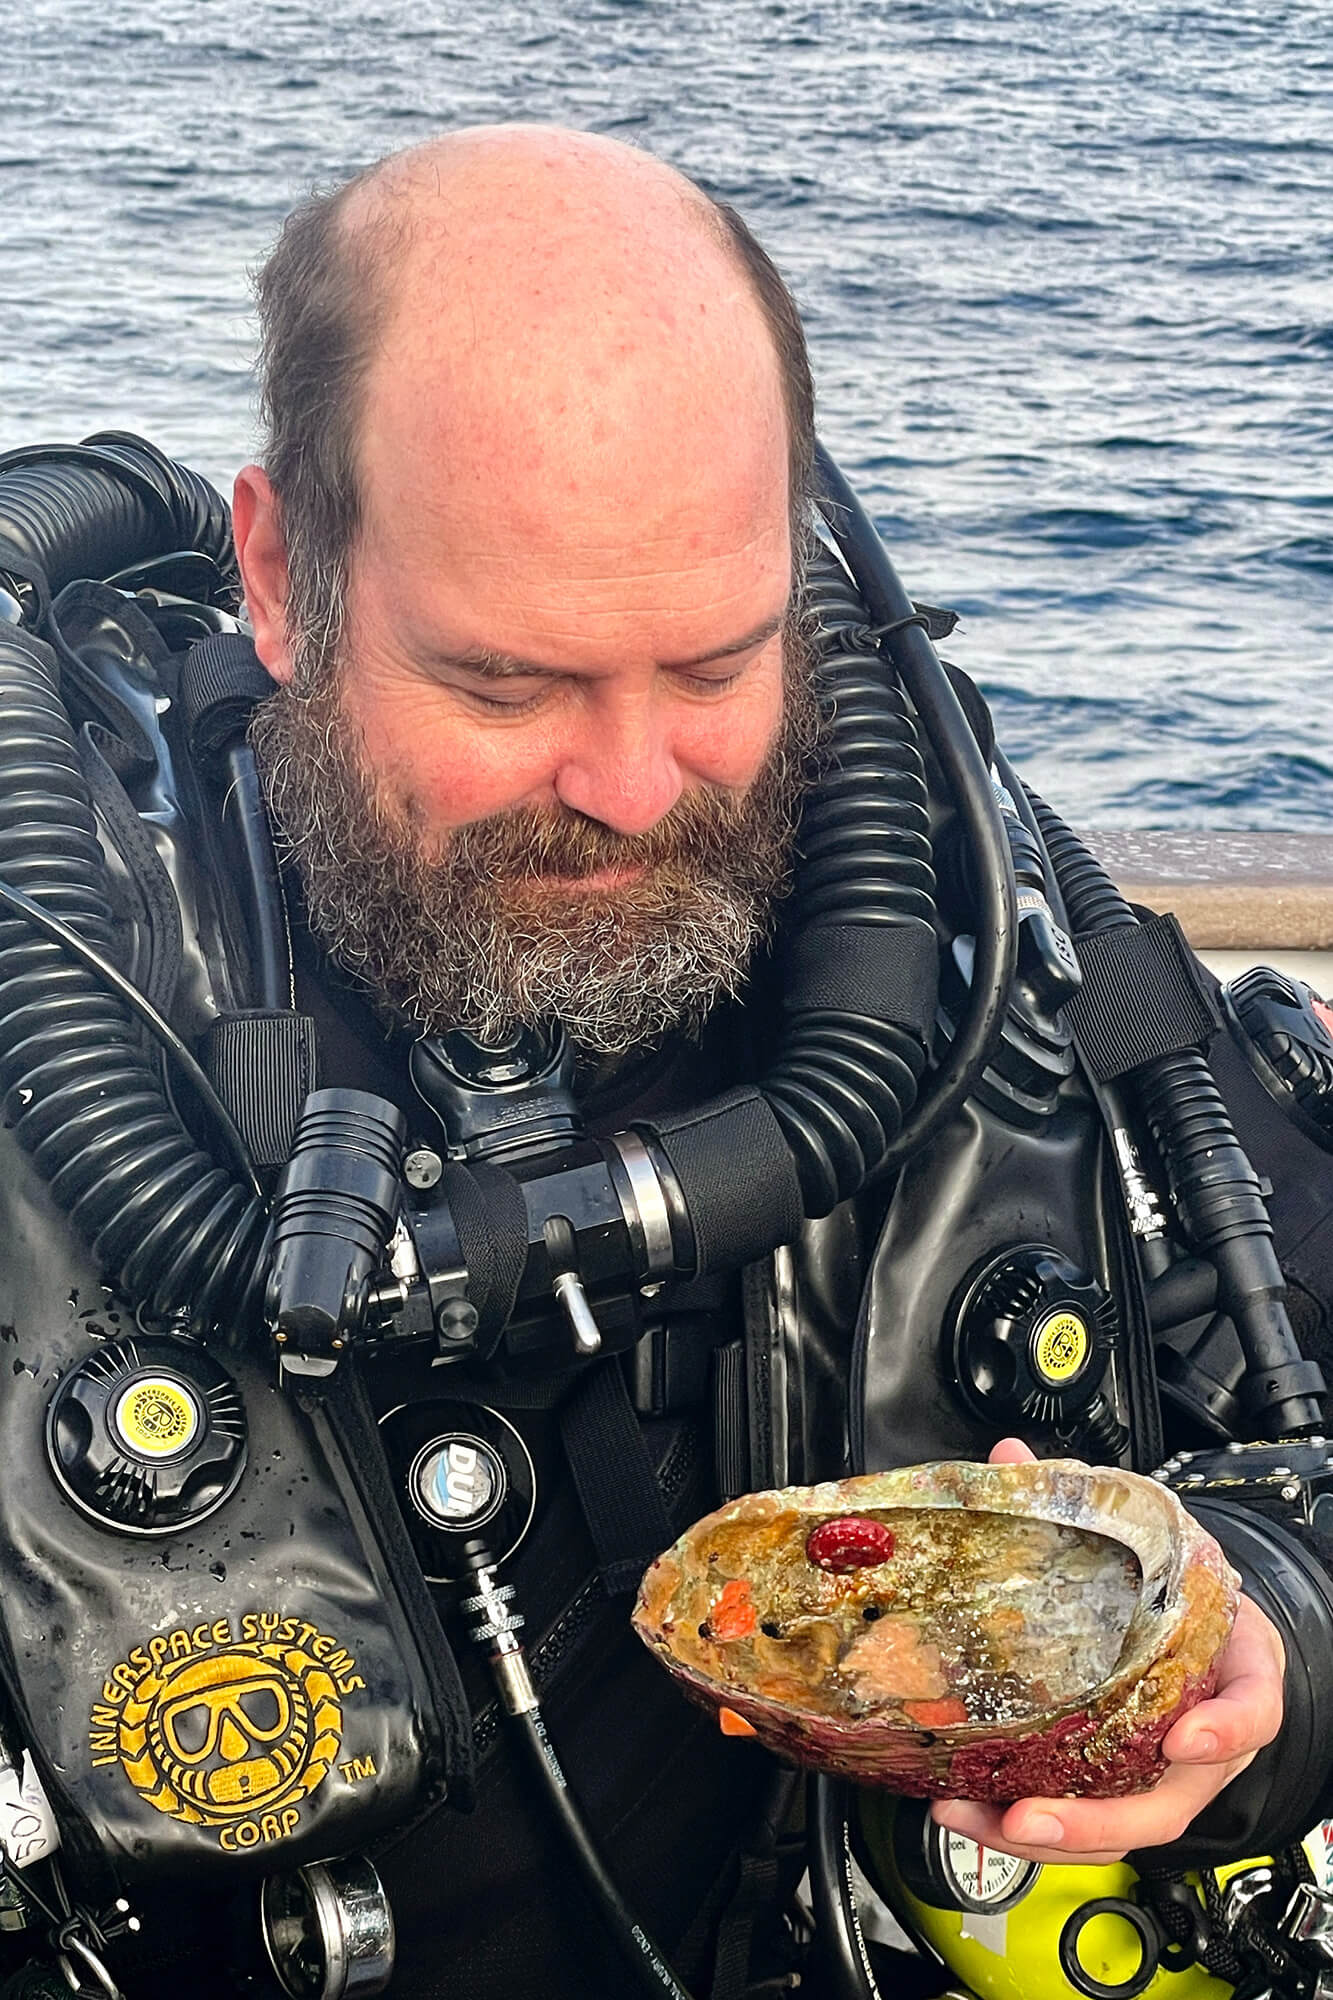 Joe Hoyt in diving gear holding an abalone shell